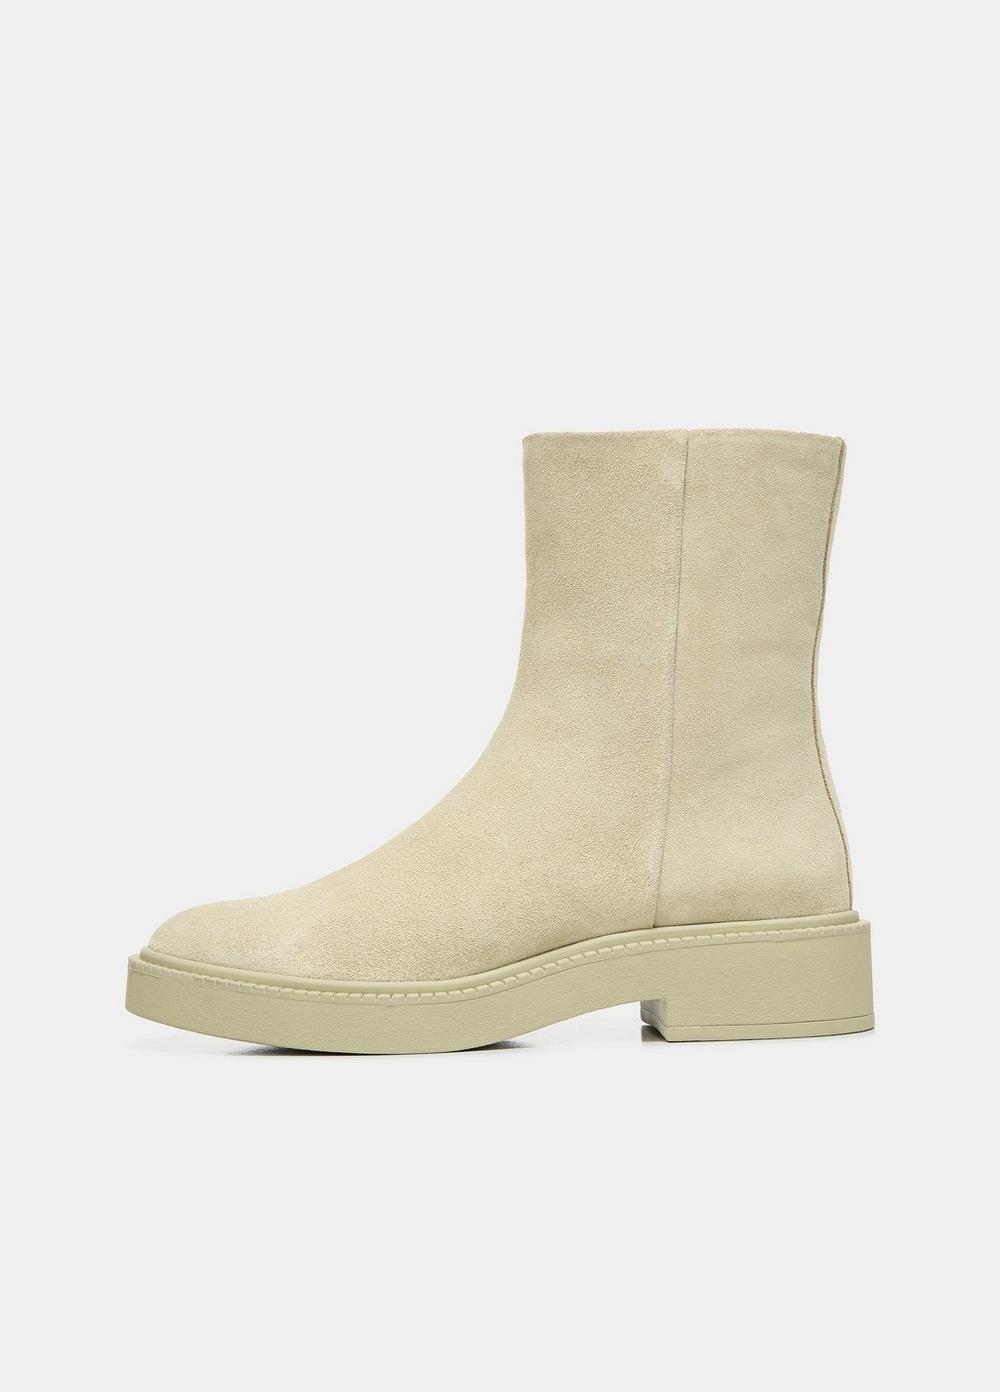 Kady Suede Low Boot, Green, Size 5.5 Vince